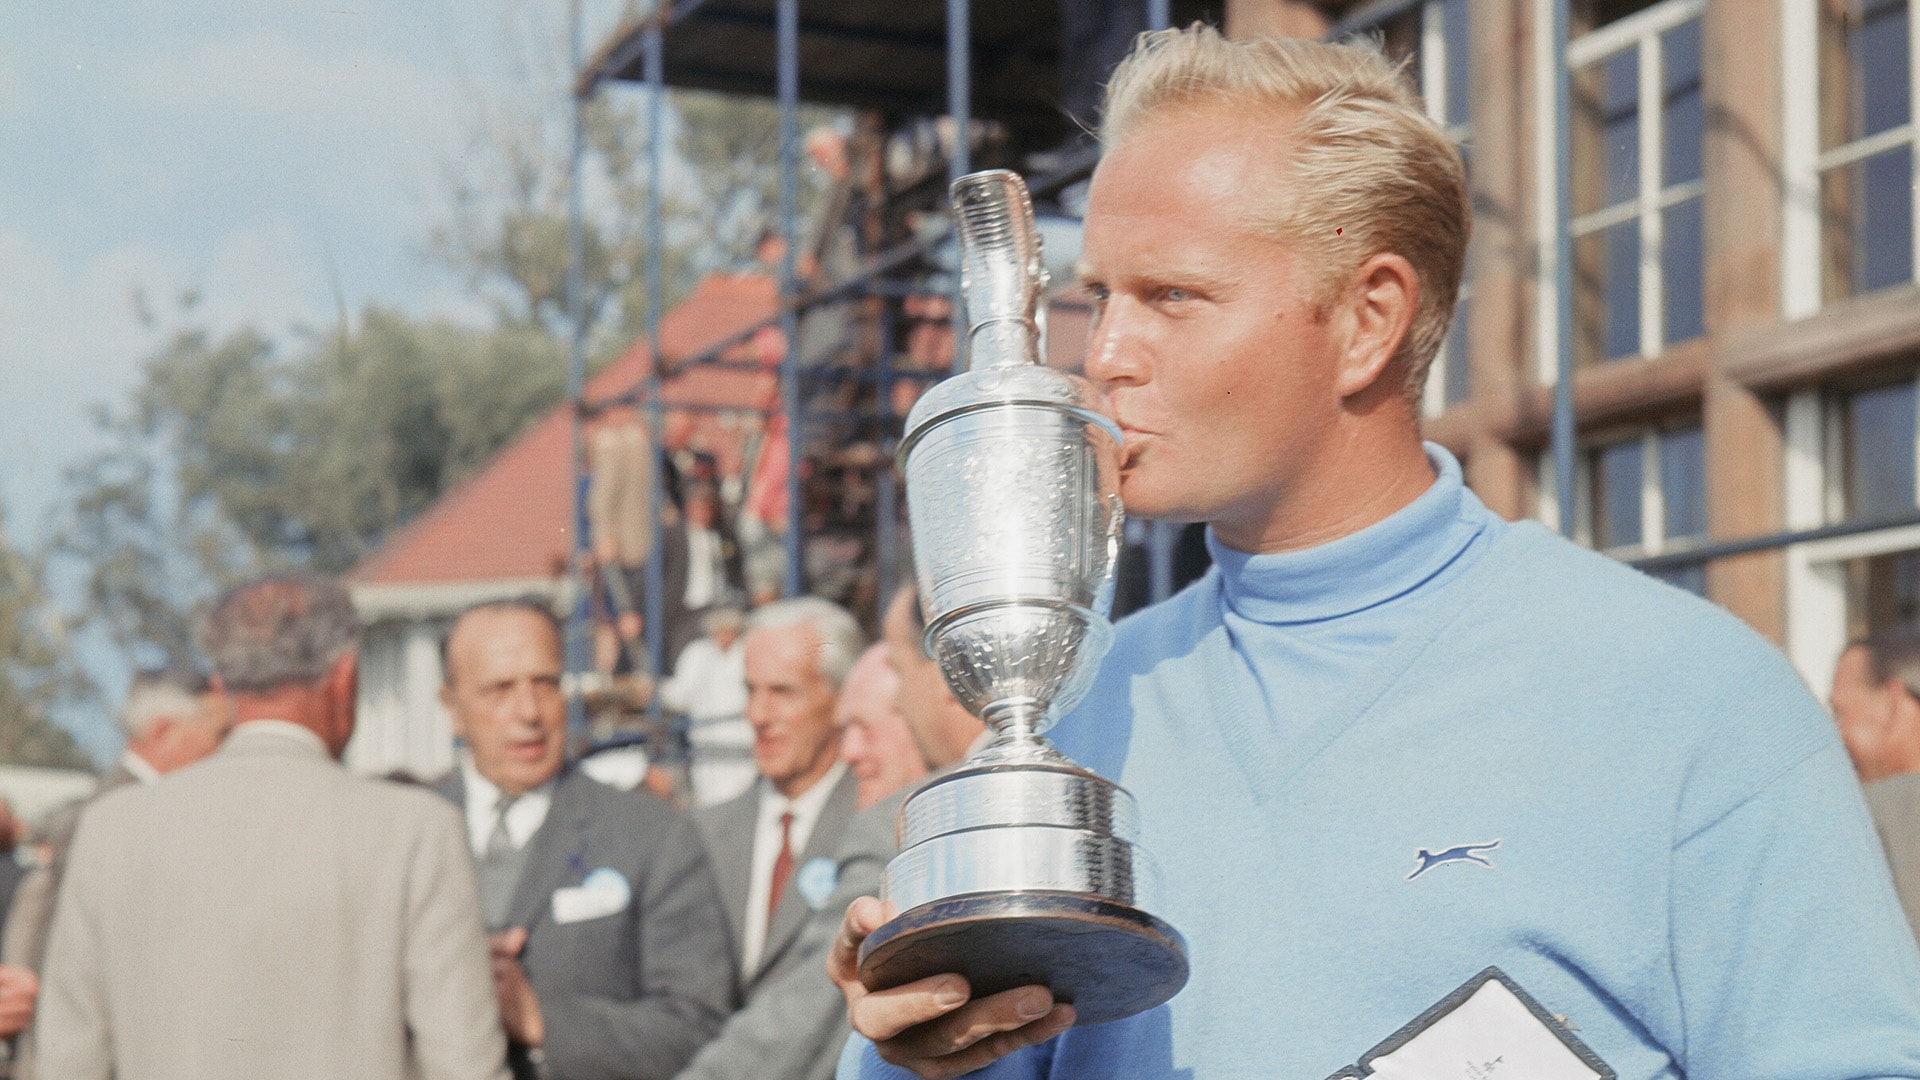 A look back at legendary ‘firsts’ at iconic Muirfield ahead of Women’s Open